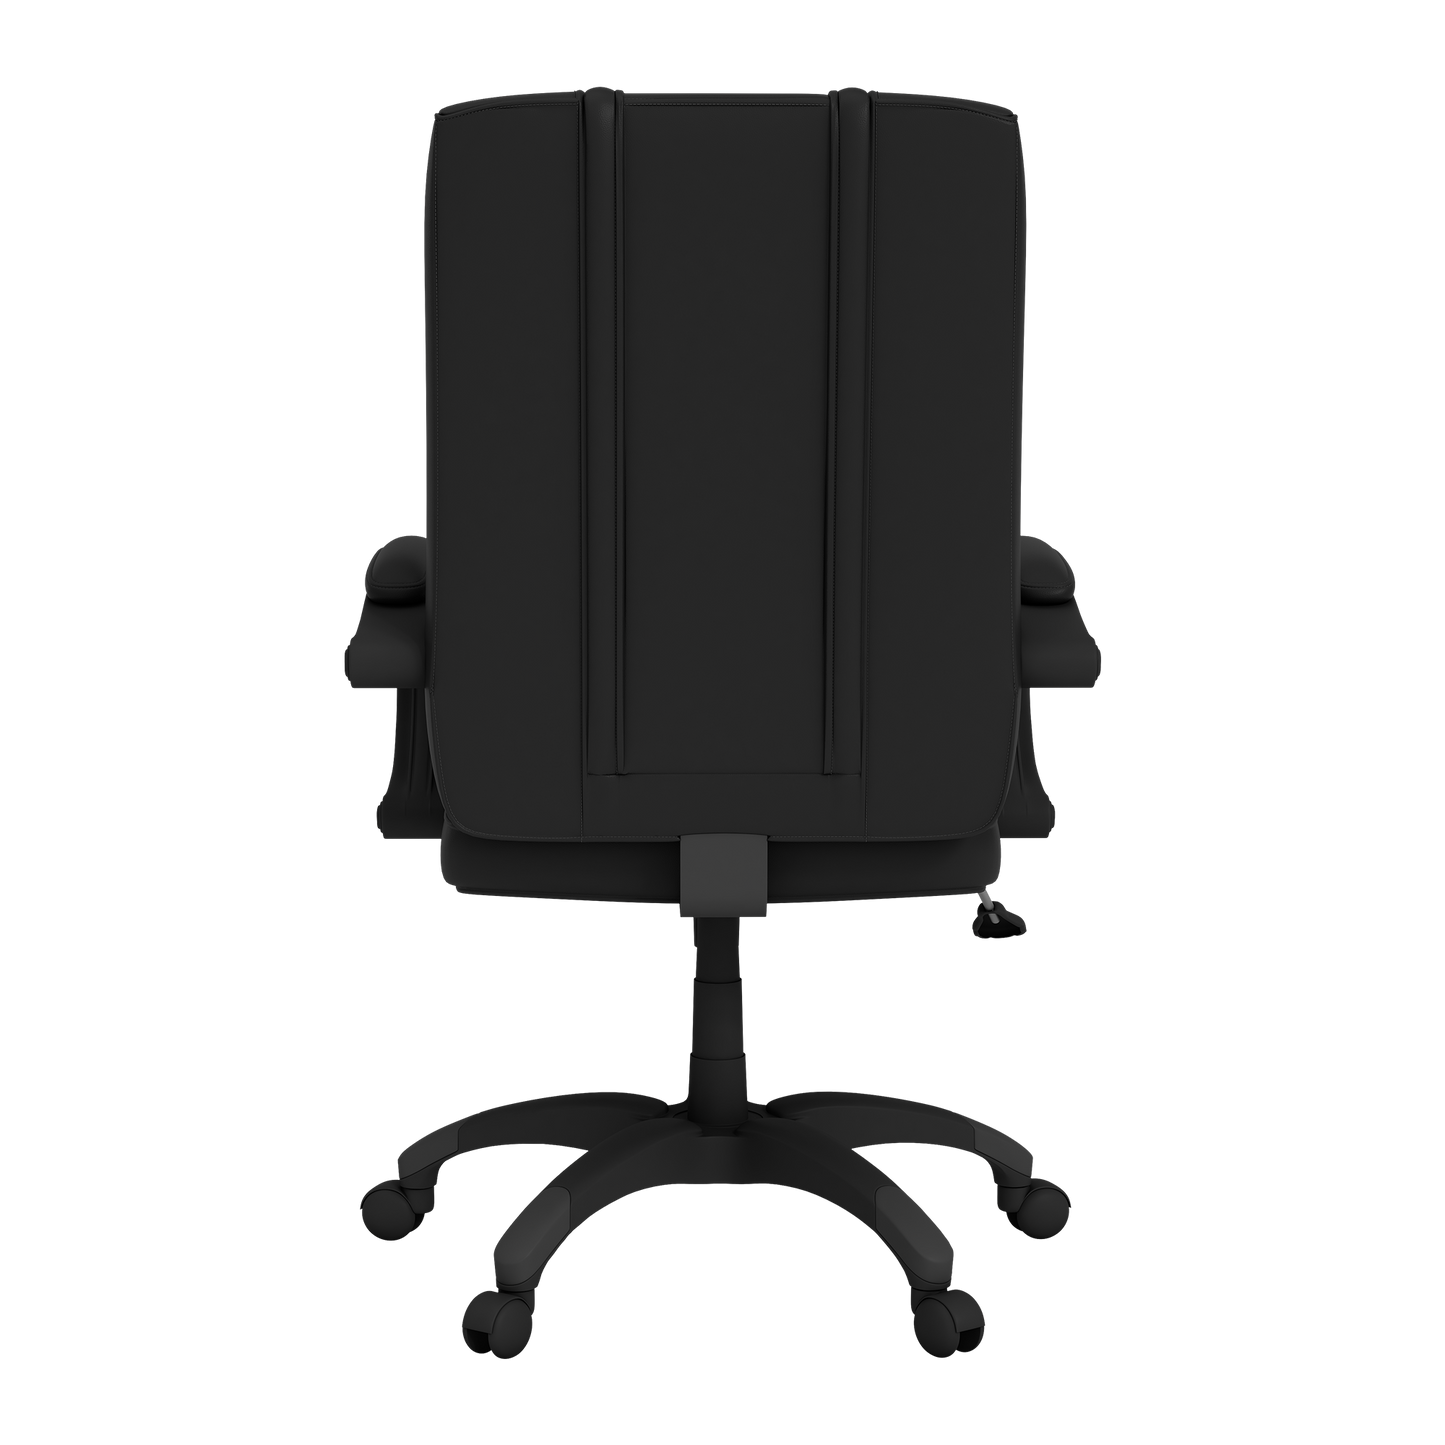 Office Chair 1000 with Clemson Tigers Logo